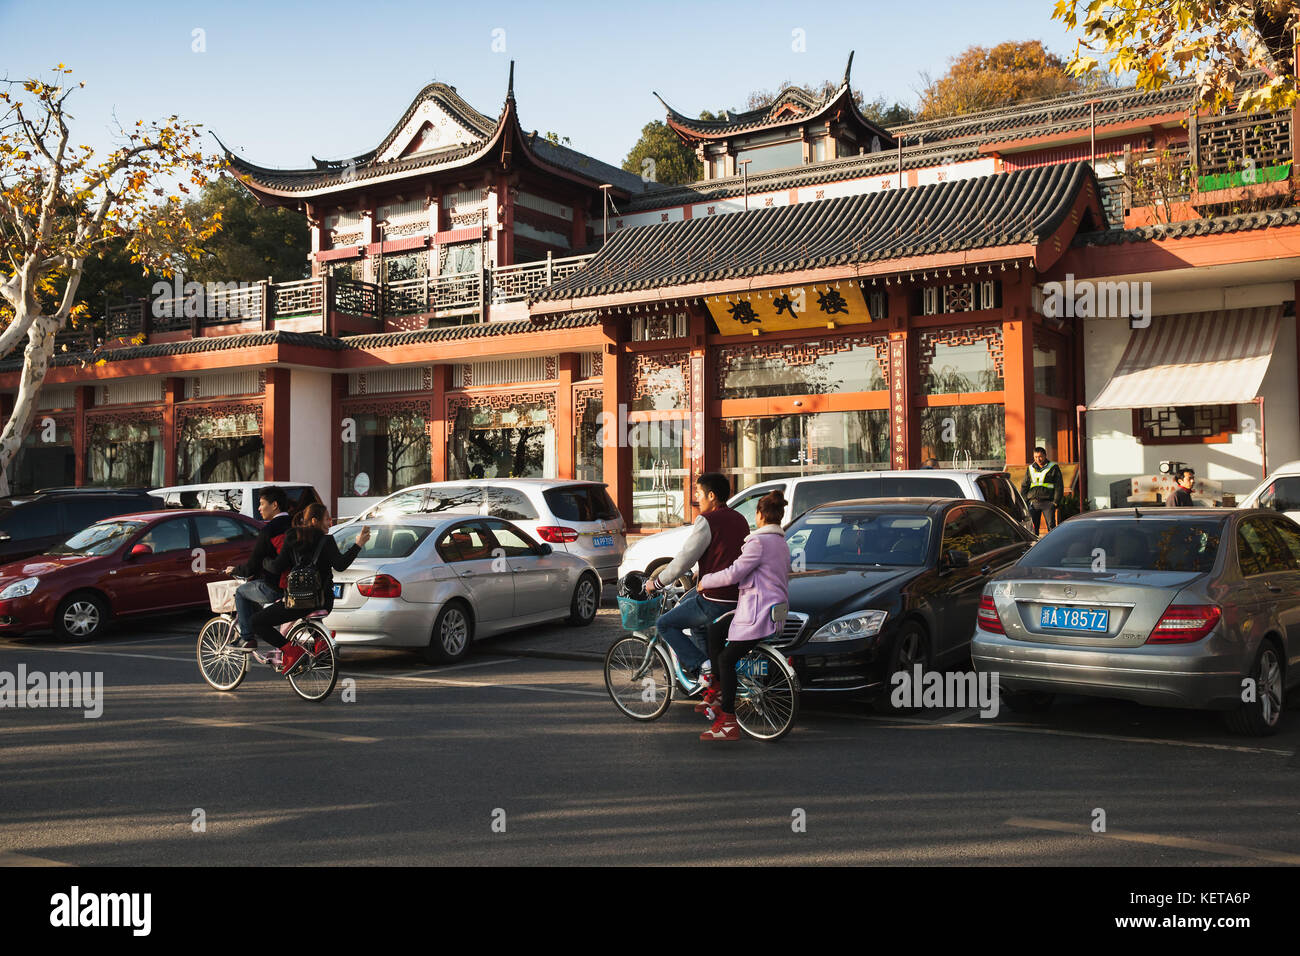 Hangzhou, China - December 5, 2014: Young bicycle riders are on the coastal road of West Lake, popular park in Hangzhou city center, China Stock Photo